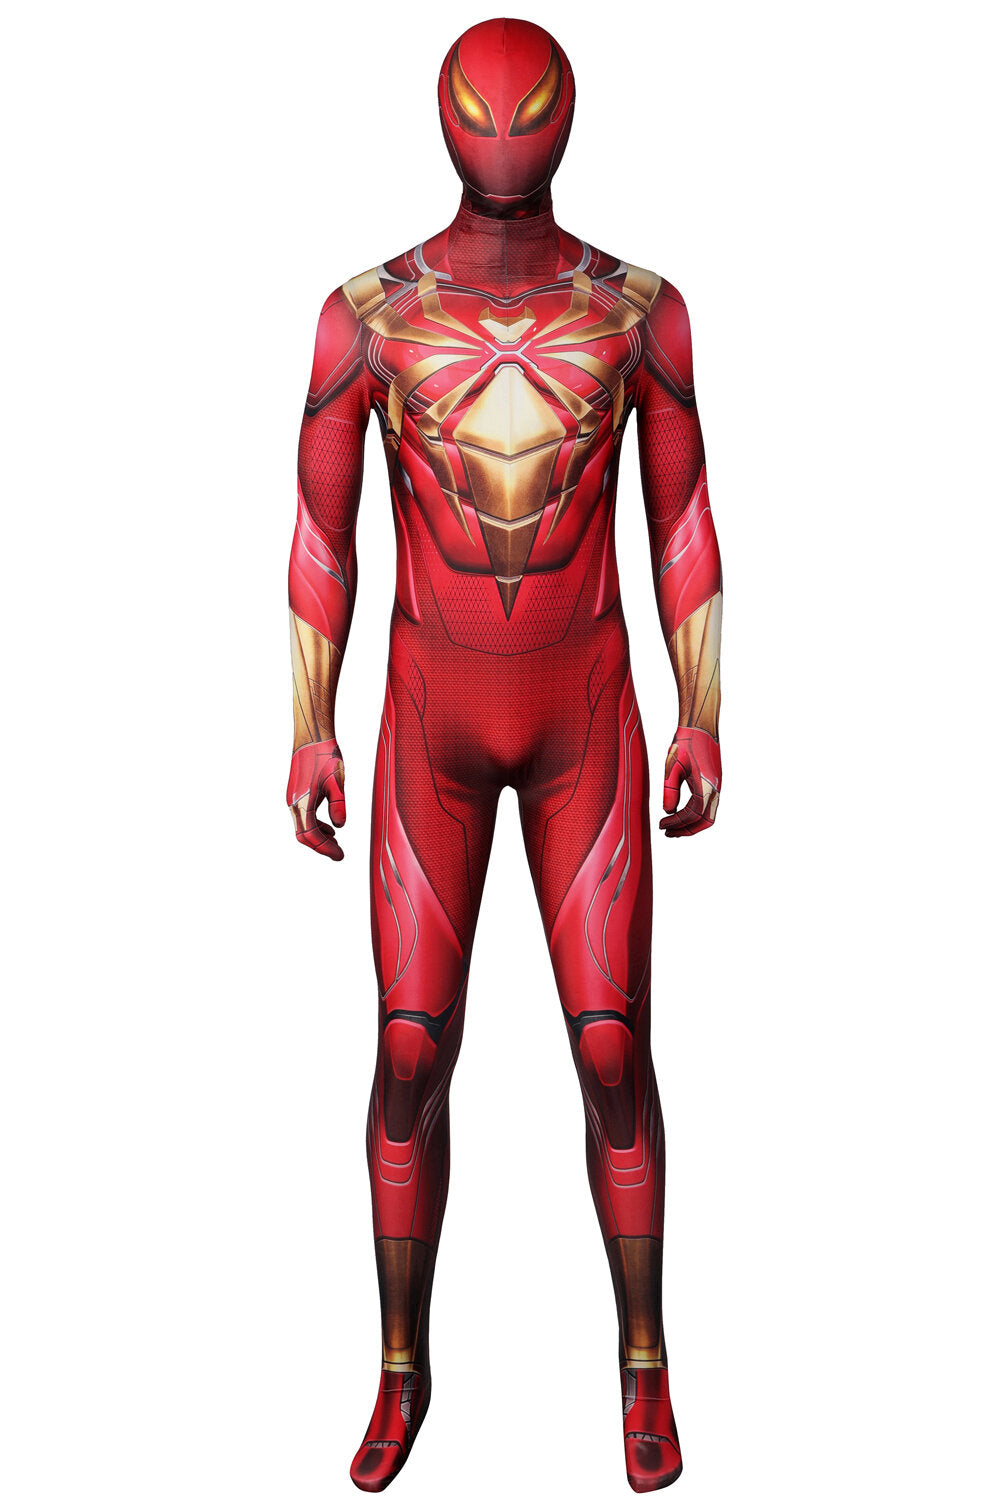 Iron Spider Armor Costume. Spider-Man Costume for Adults